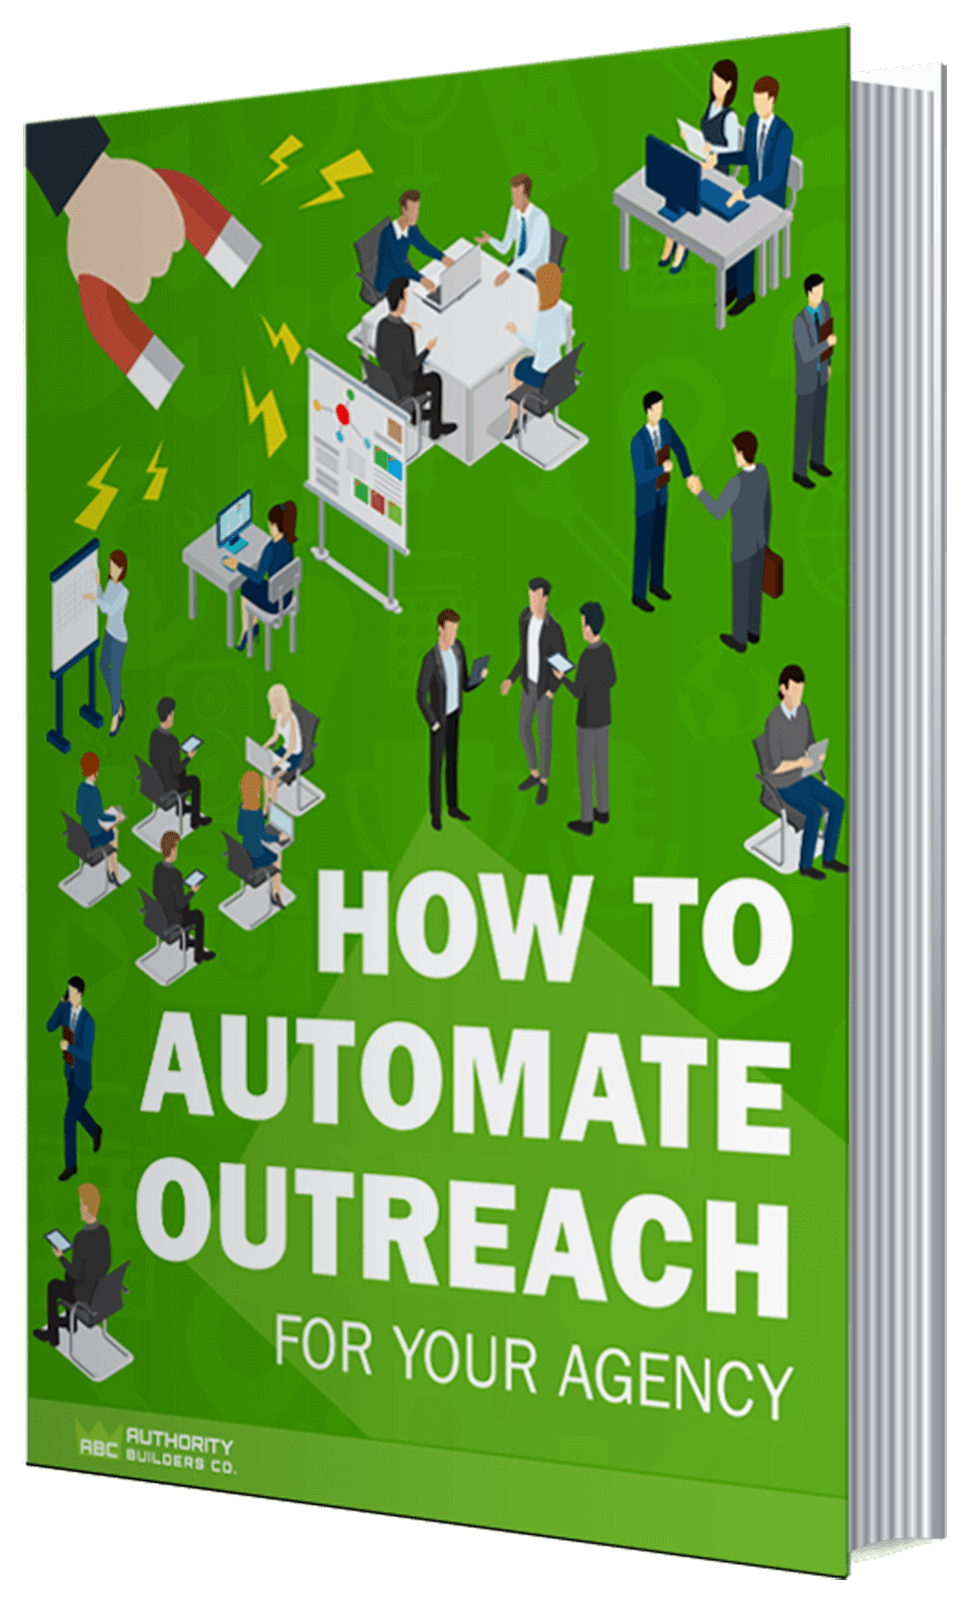 How to Automate Outreach for Your Agency